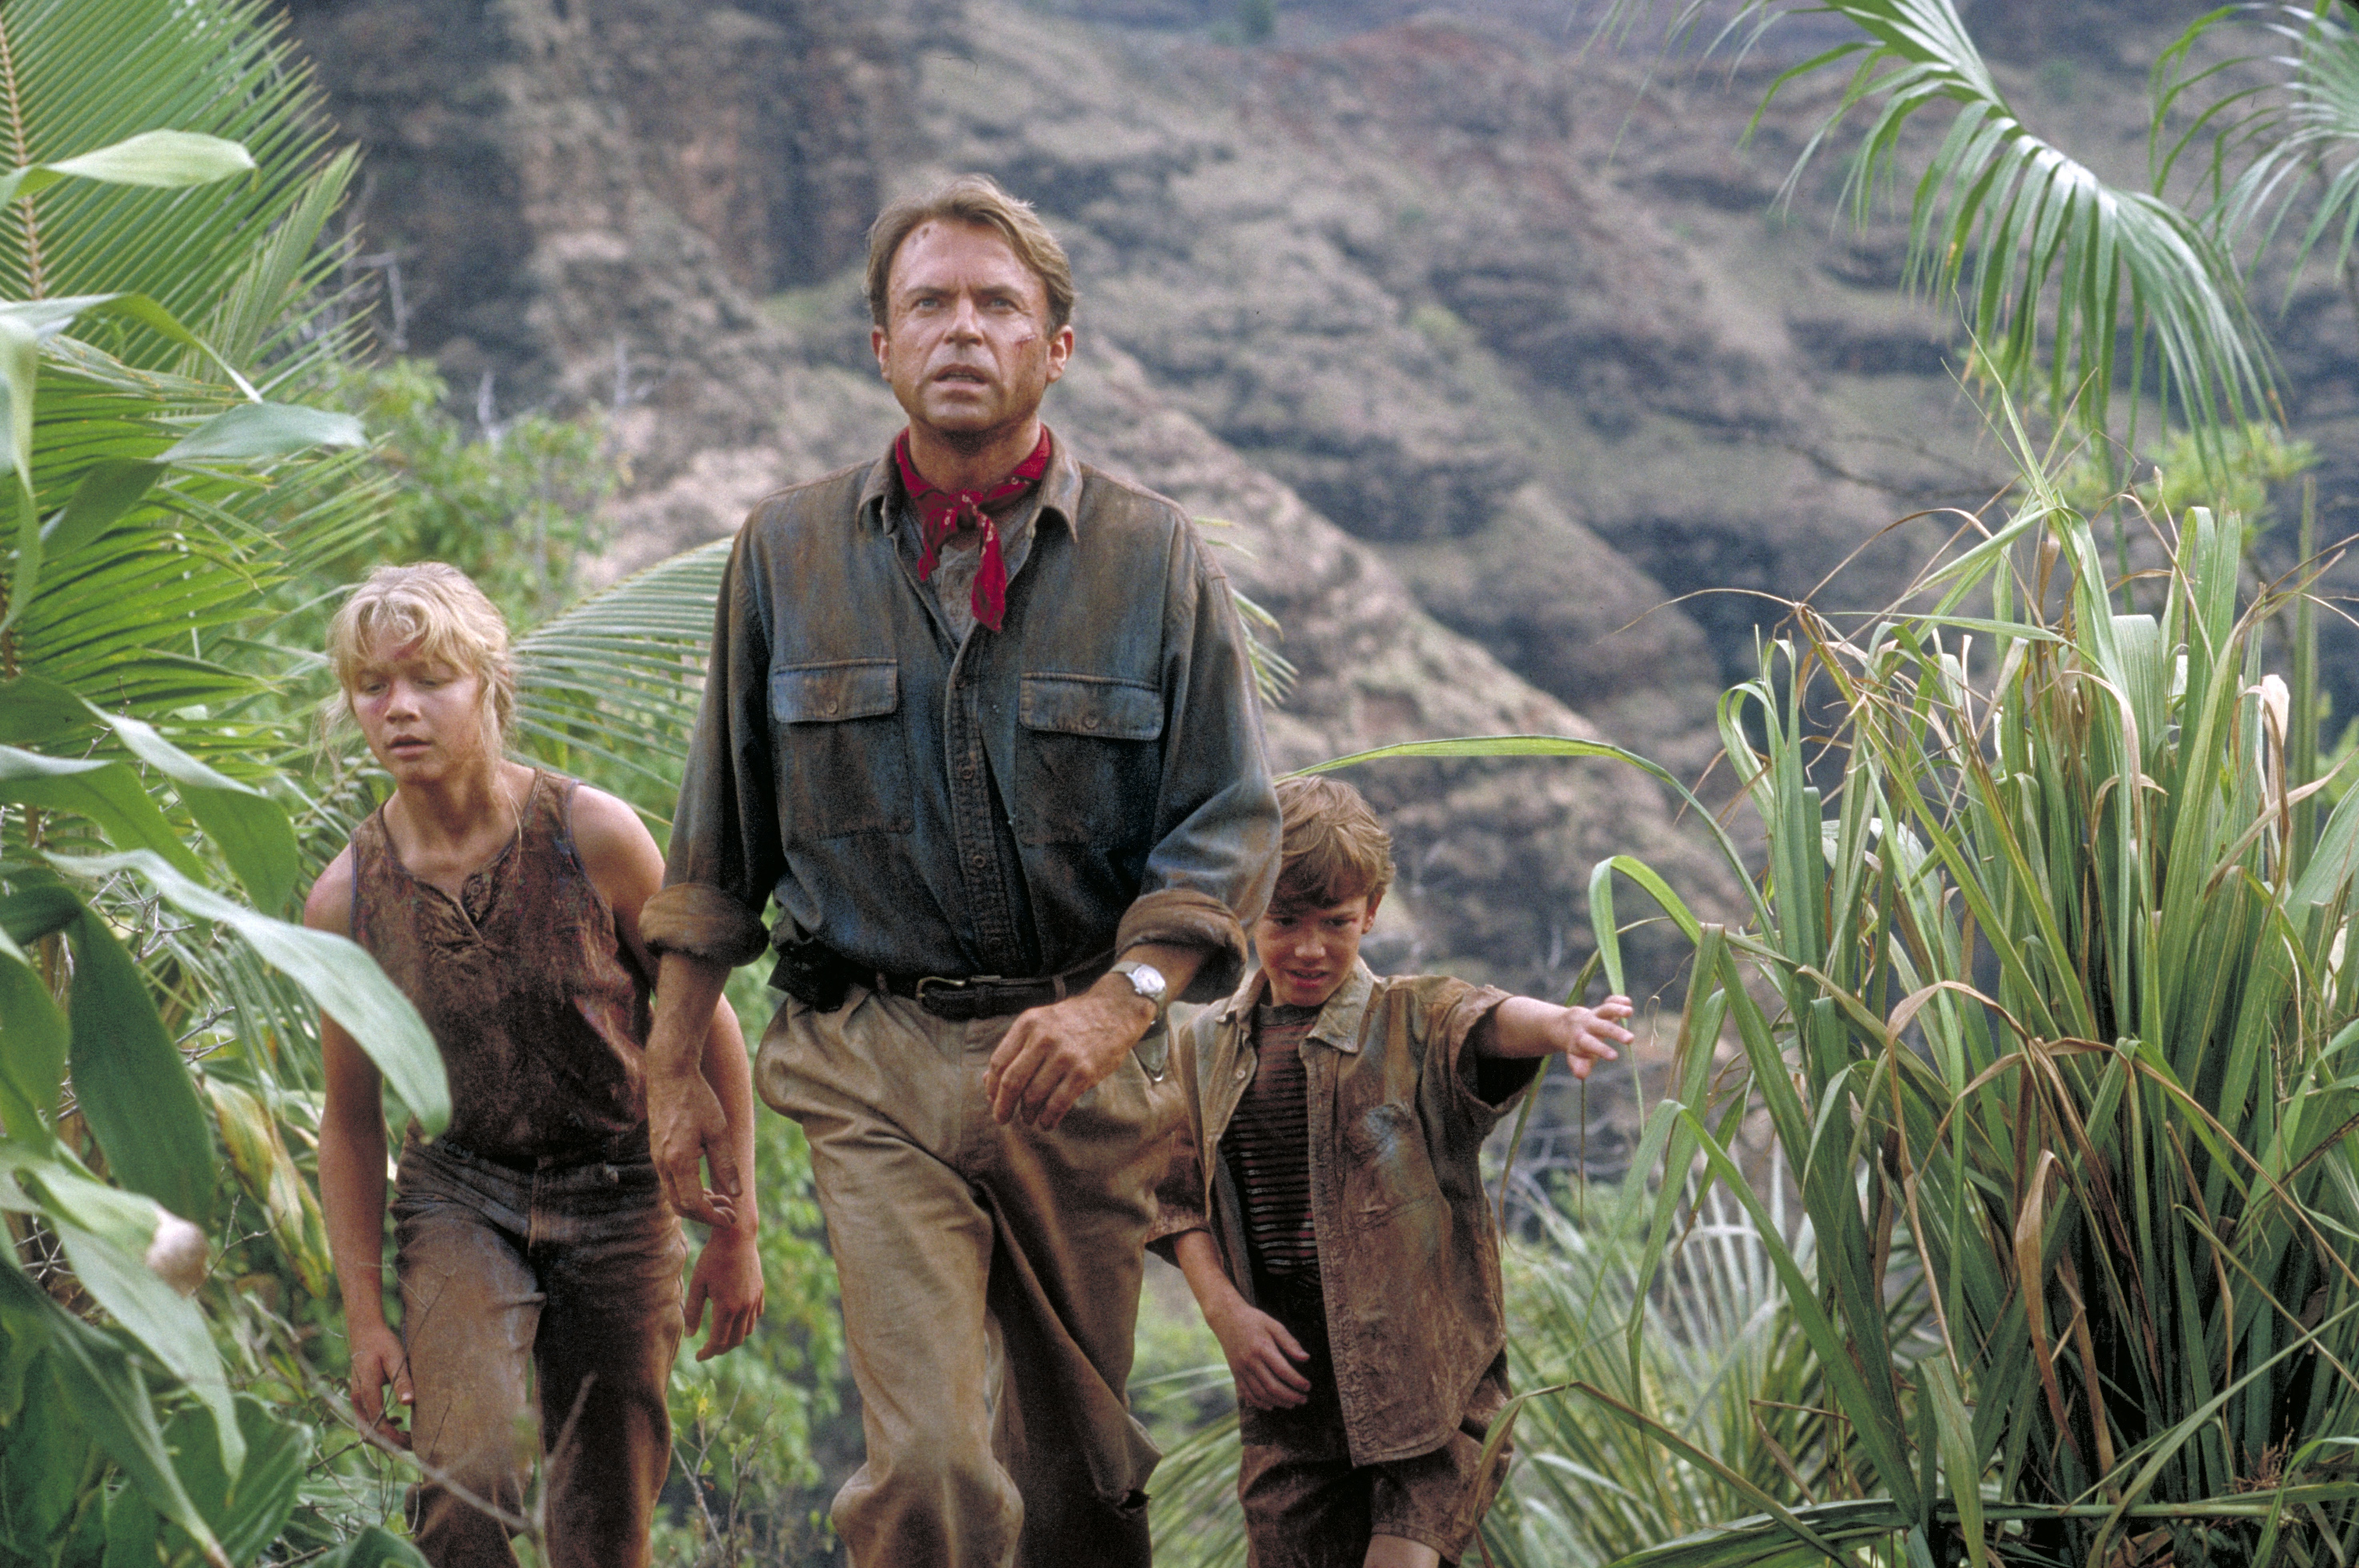 Ariana Richards, Sam Neill and Joseph Mazzello in the set of "Jurassic Park," in 1993. | Source: Getty Images